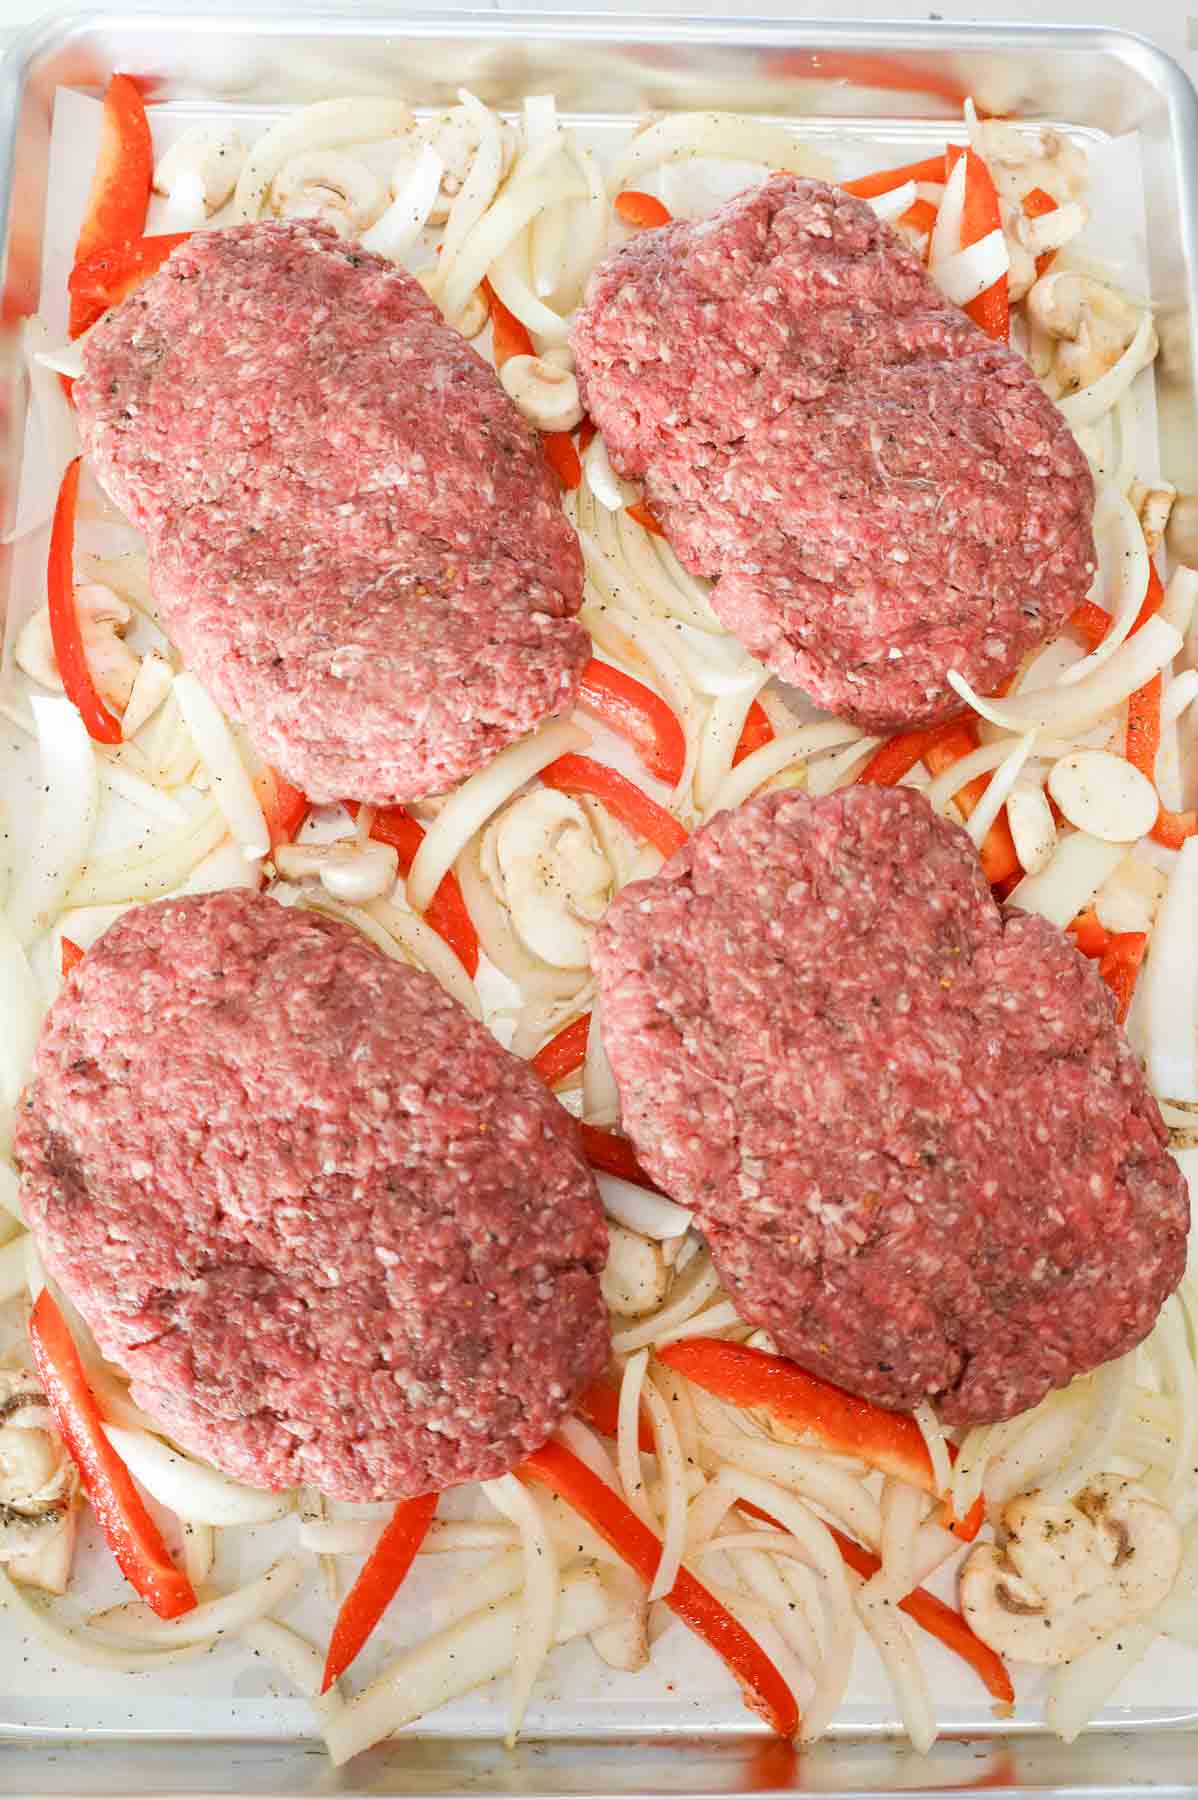 raw ground beef patties on top of sliced onions, red peppers and mushrooms on a baking sheet